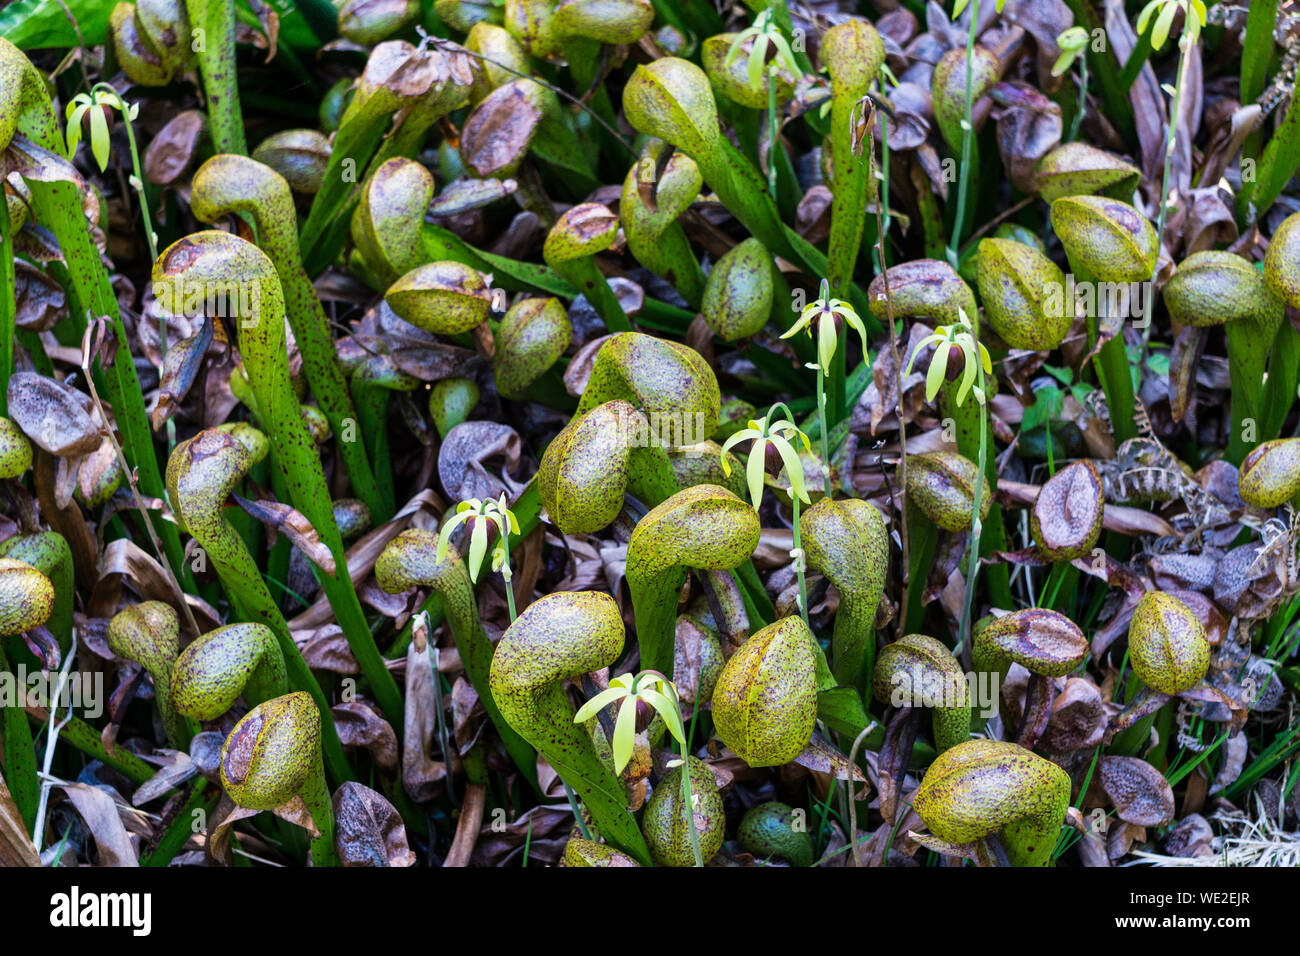 High Angle View Of Carnivorous Plants At Botanical Garden Stock Photo